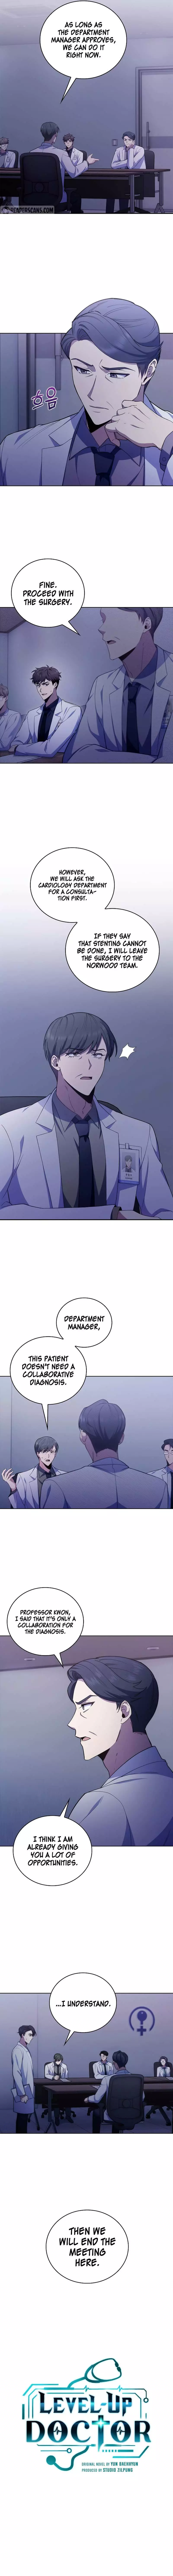 Level-Up Doctor (Manhwa) - 72 page 4-9e18a464